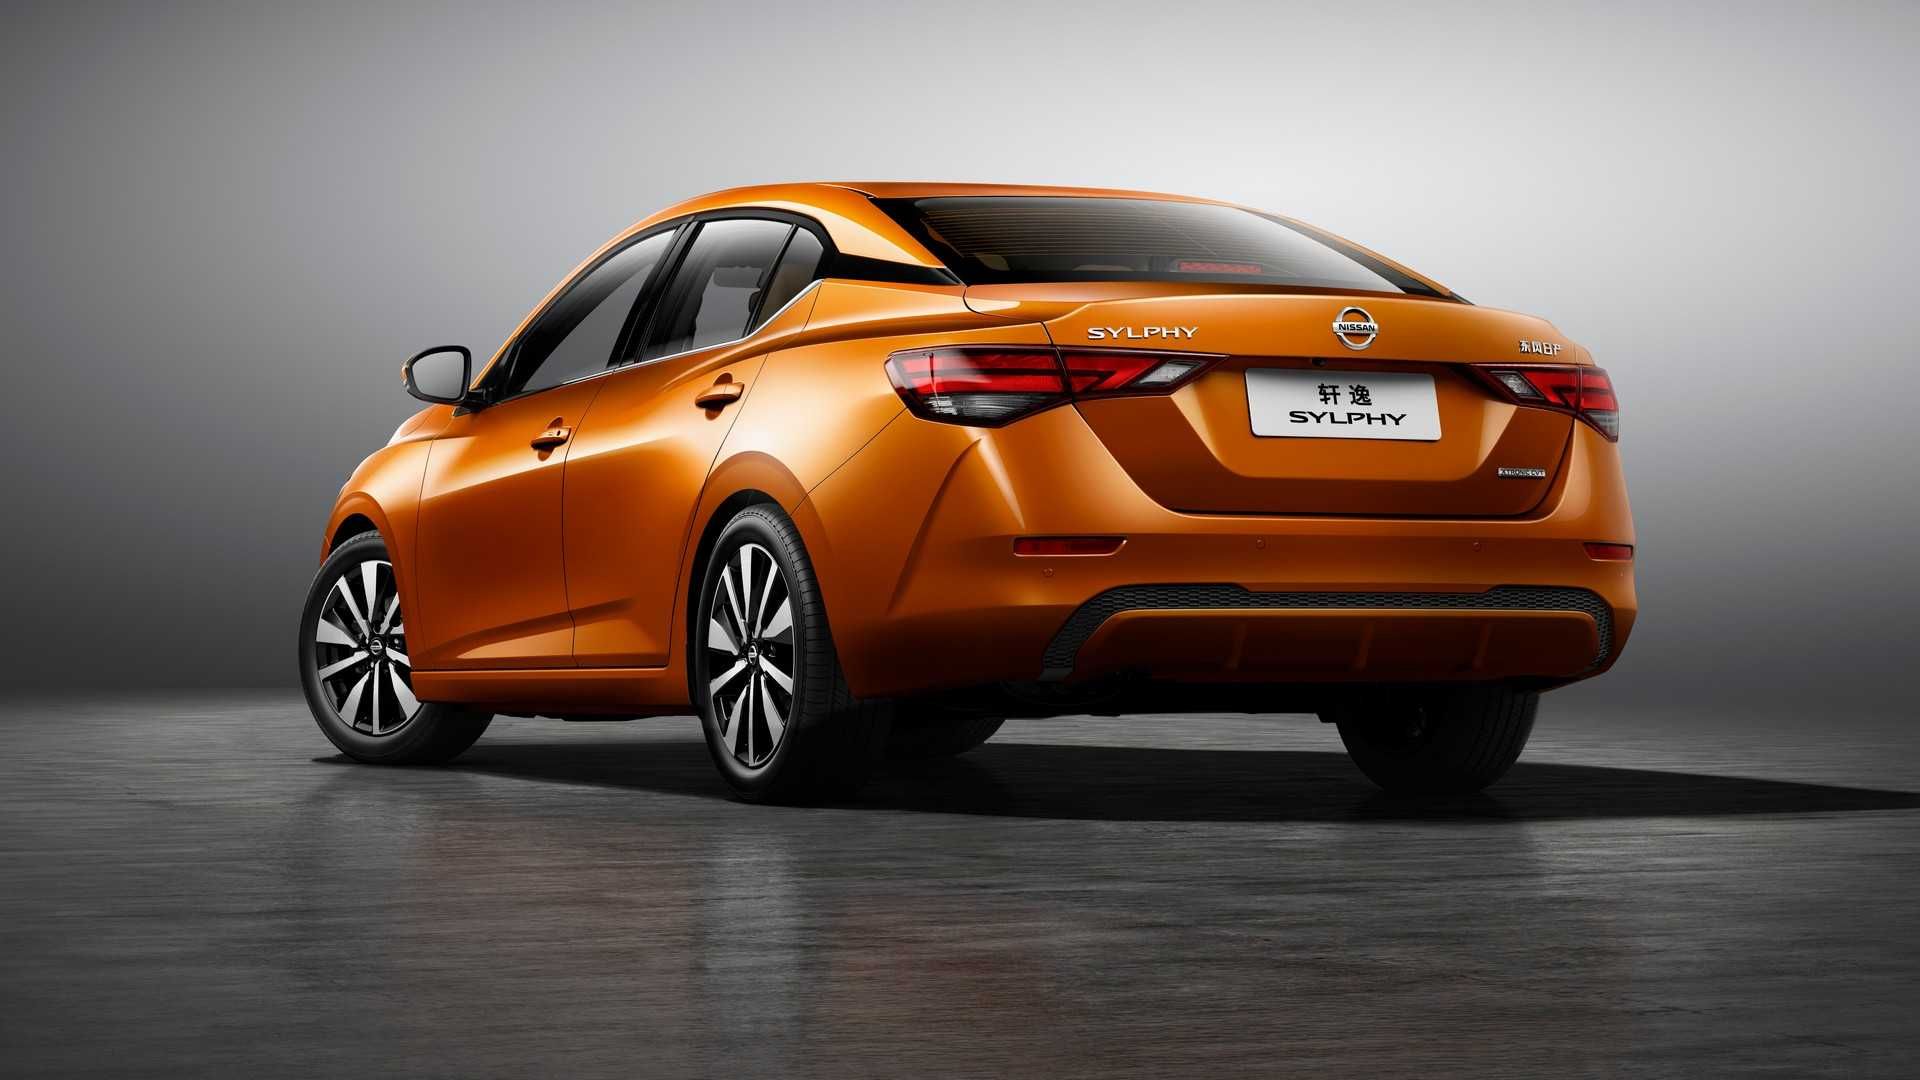 2019 Thanks to the Nissan Sylphy Concept We Have a Nice Preview of the 2020 Nissan Sentra